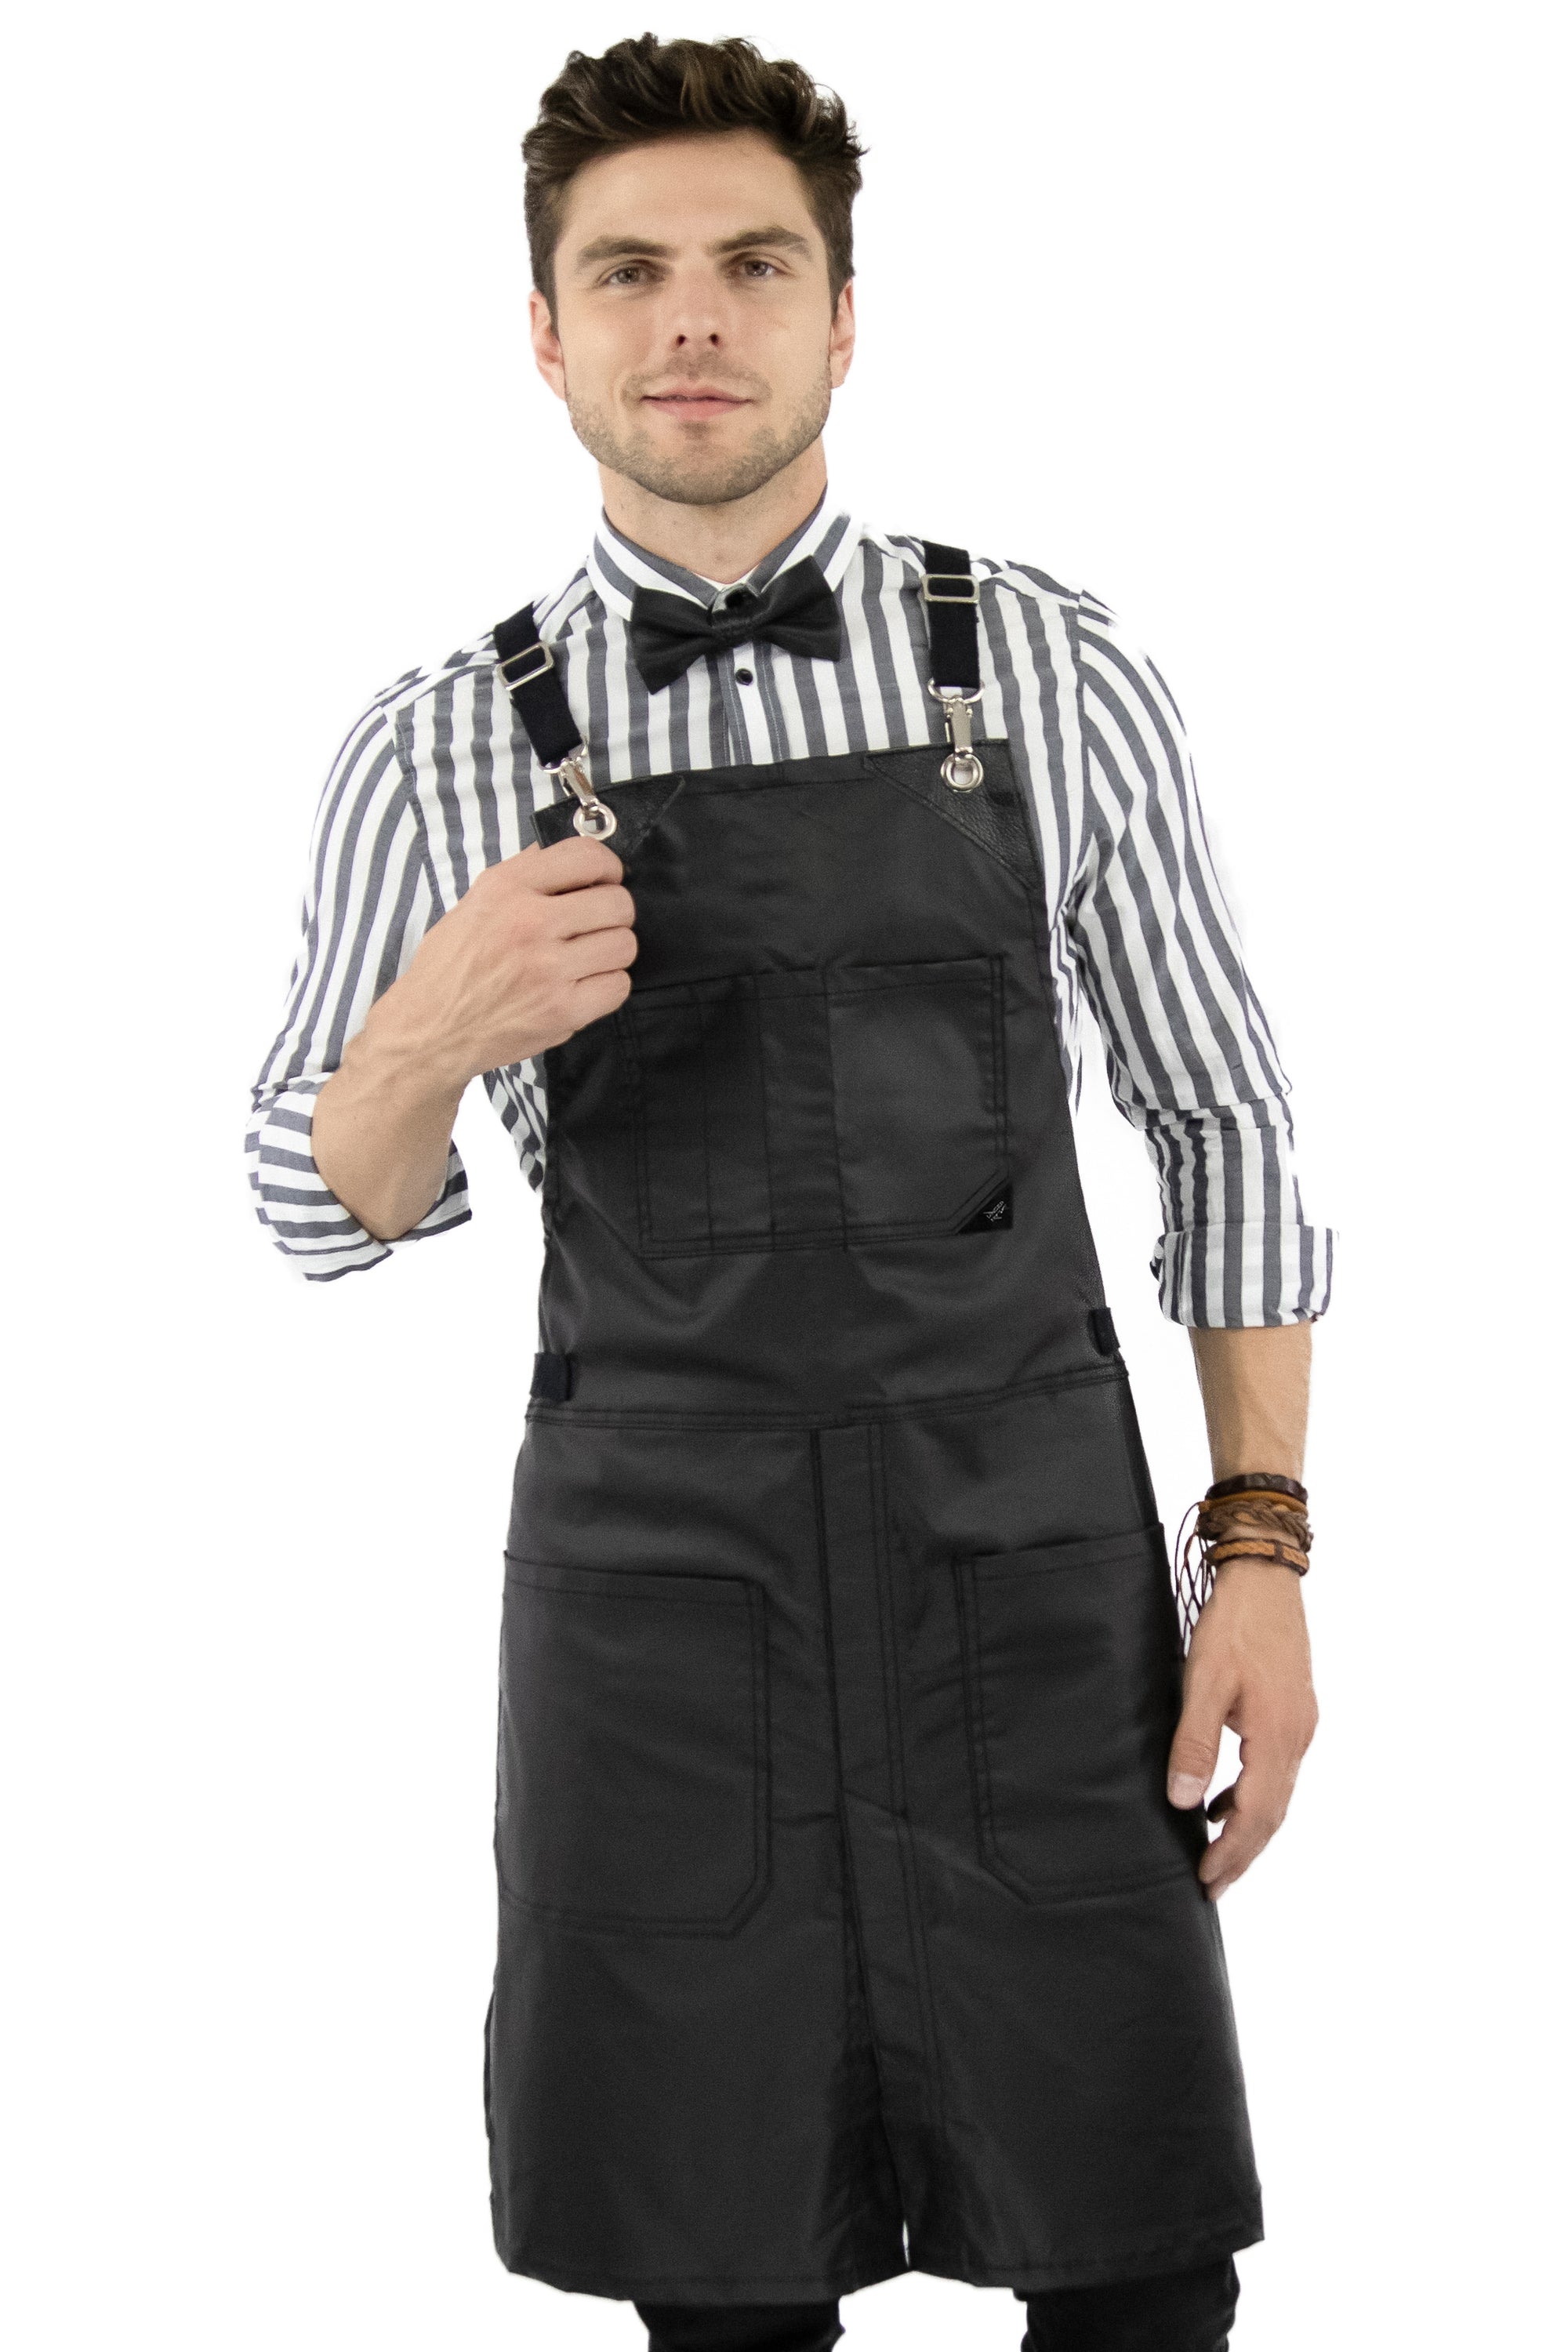 Image Coated Aprons Collection